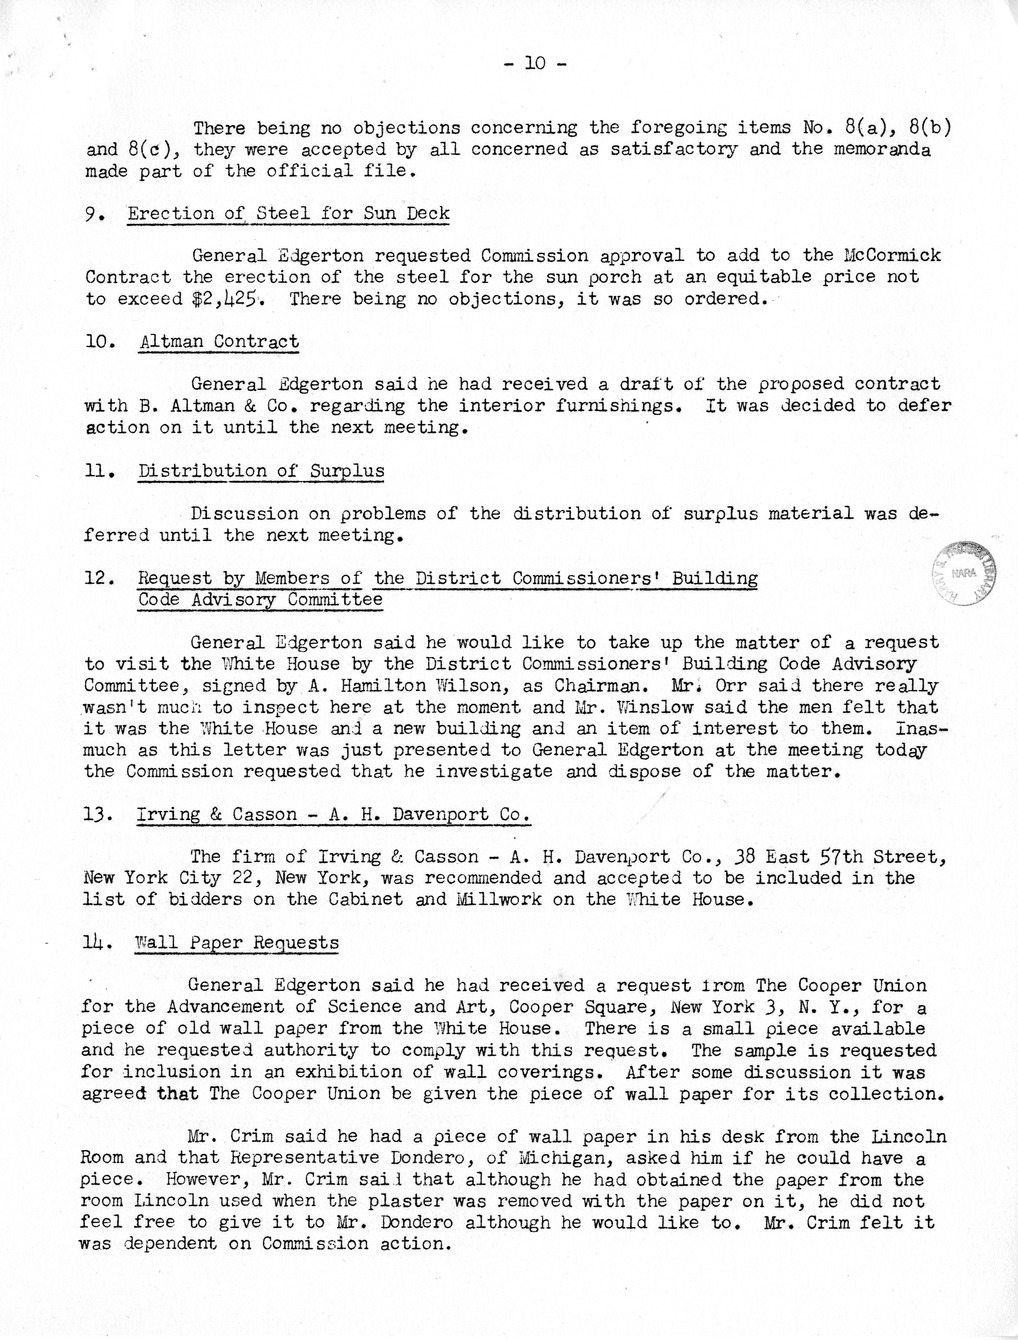 Minutes of the Thirty-First Meeting of the Commission on Renovation of the Executive Mansion